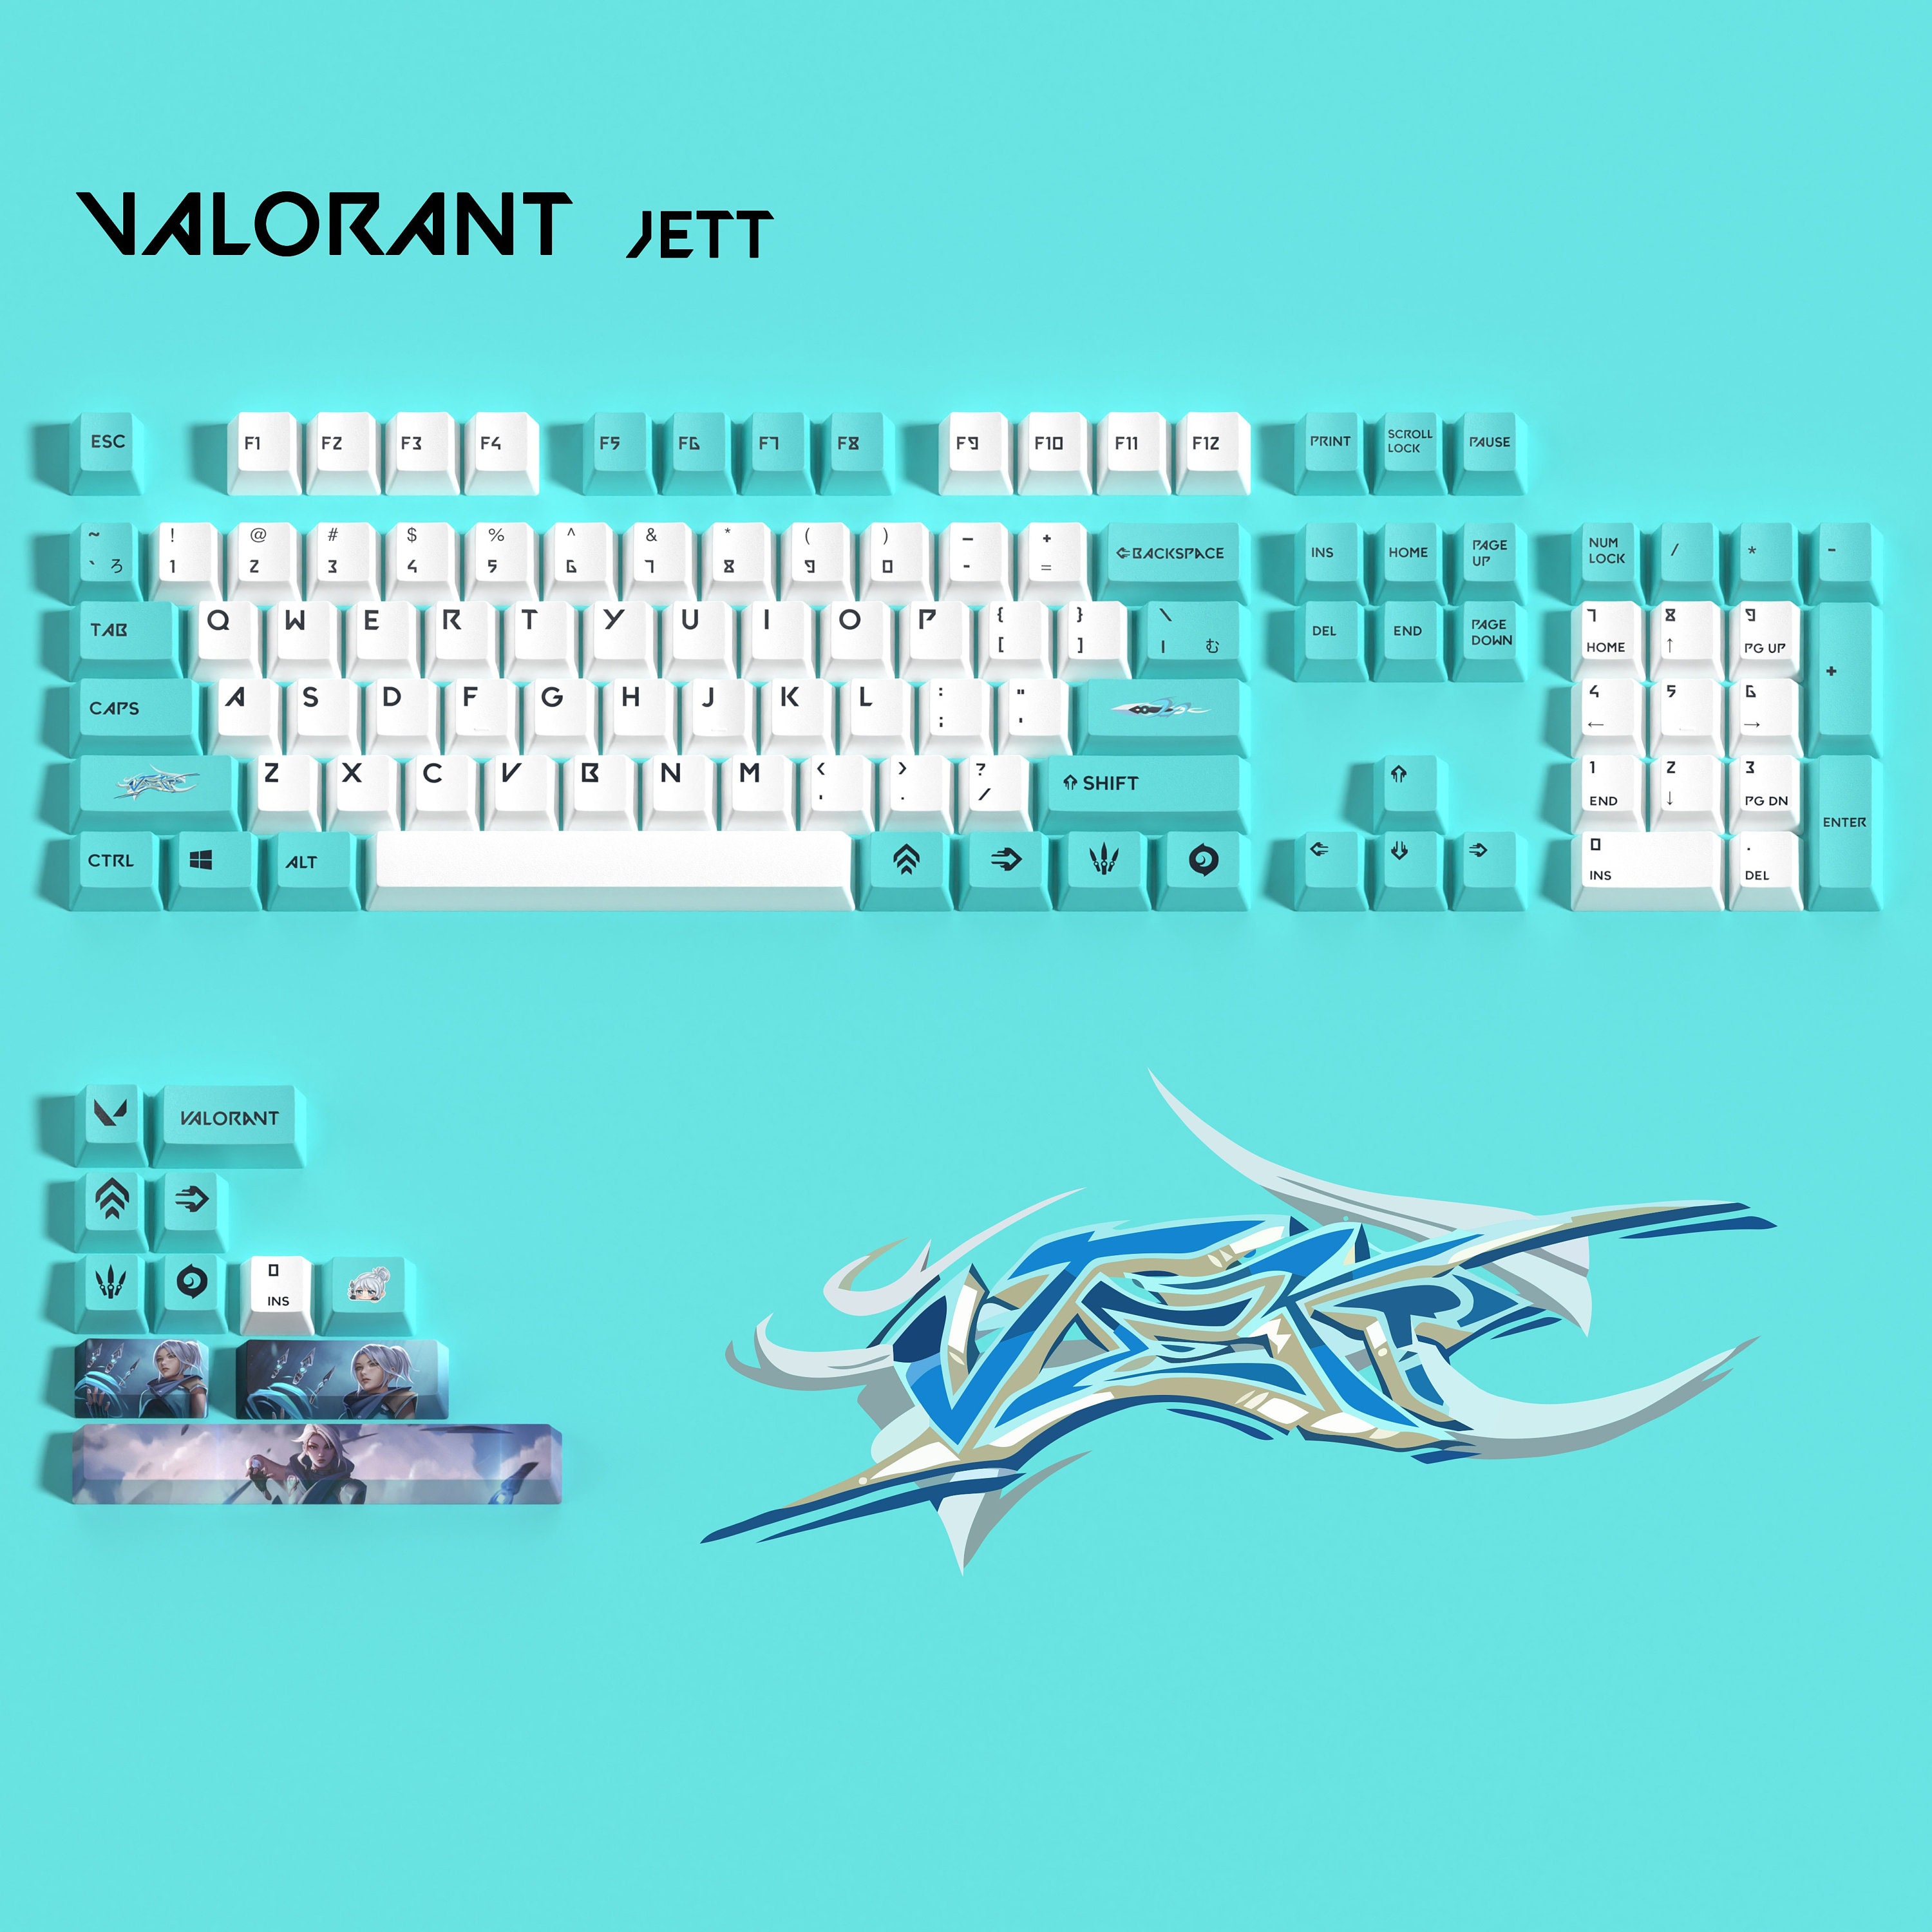 Valorant Custom Keycaps (Agent Killjoy) - Laser Engraved with Each Valorant  Agent's Portrait, Skills, and Position. Fit with Any Mechanical Keyboard.